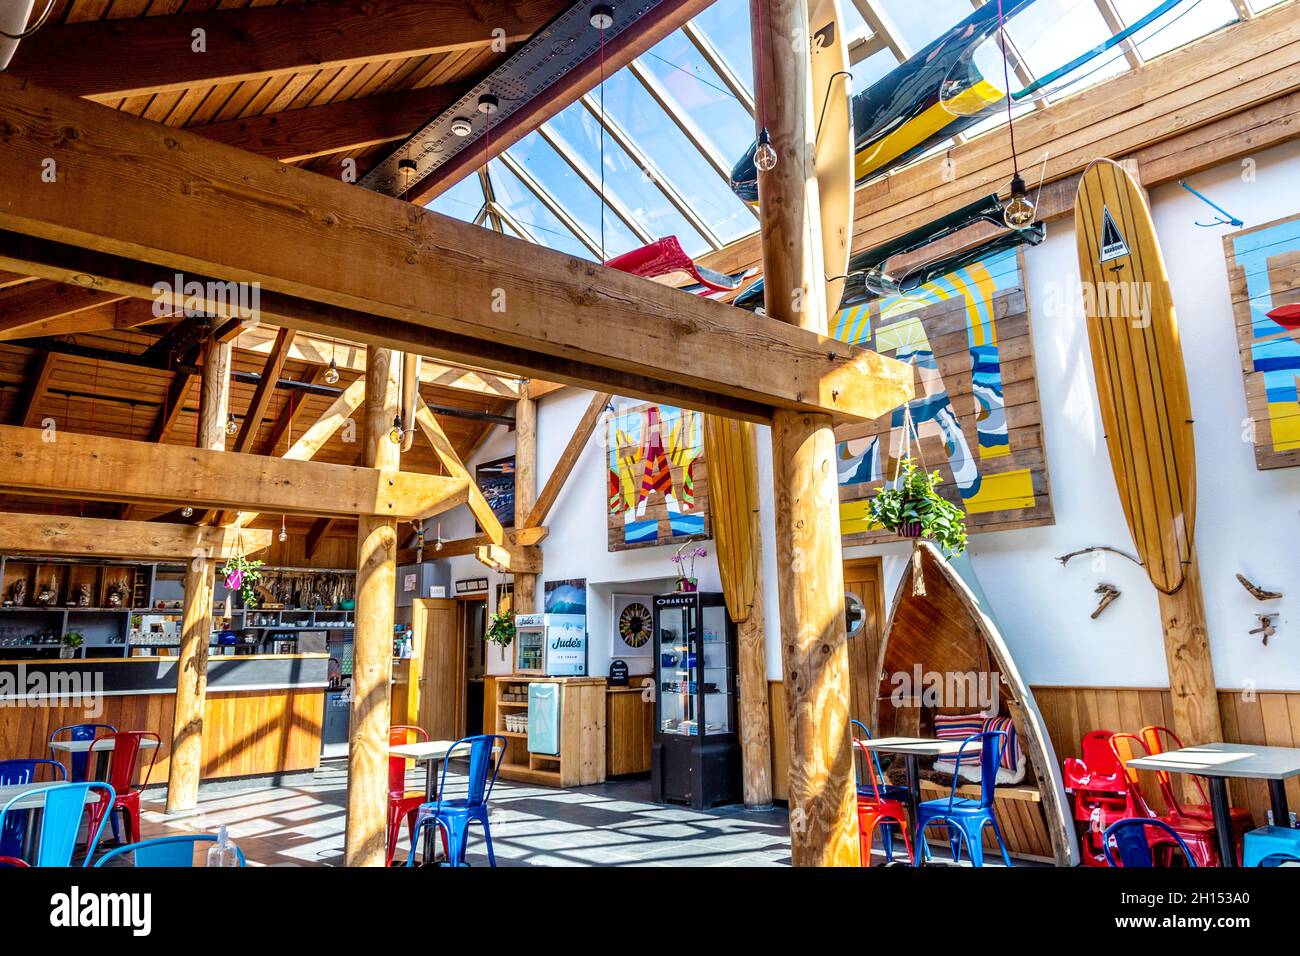 Interor decorated with surf boards at Surf Beach Bar, Sennen Cove, Penwith Peninsula, Cornwall, UK Stock Photo